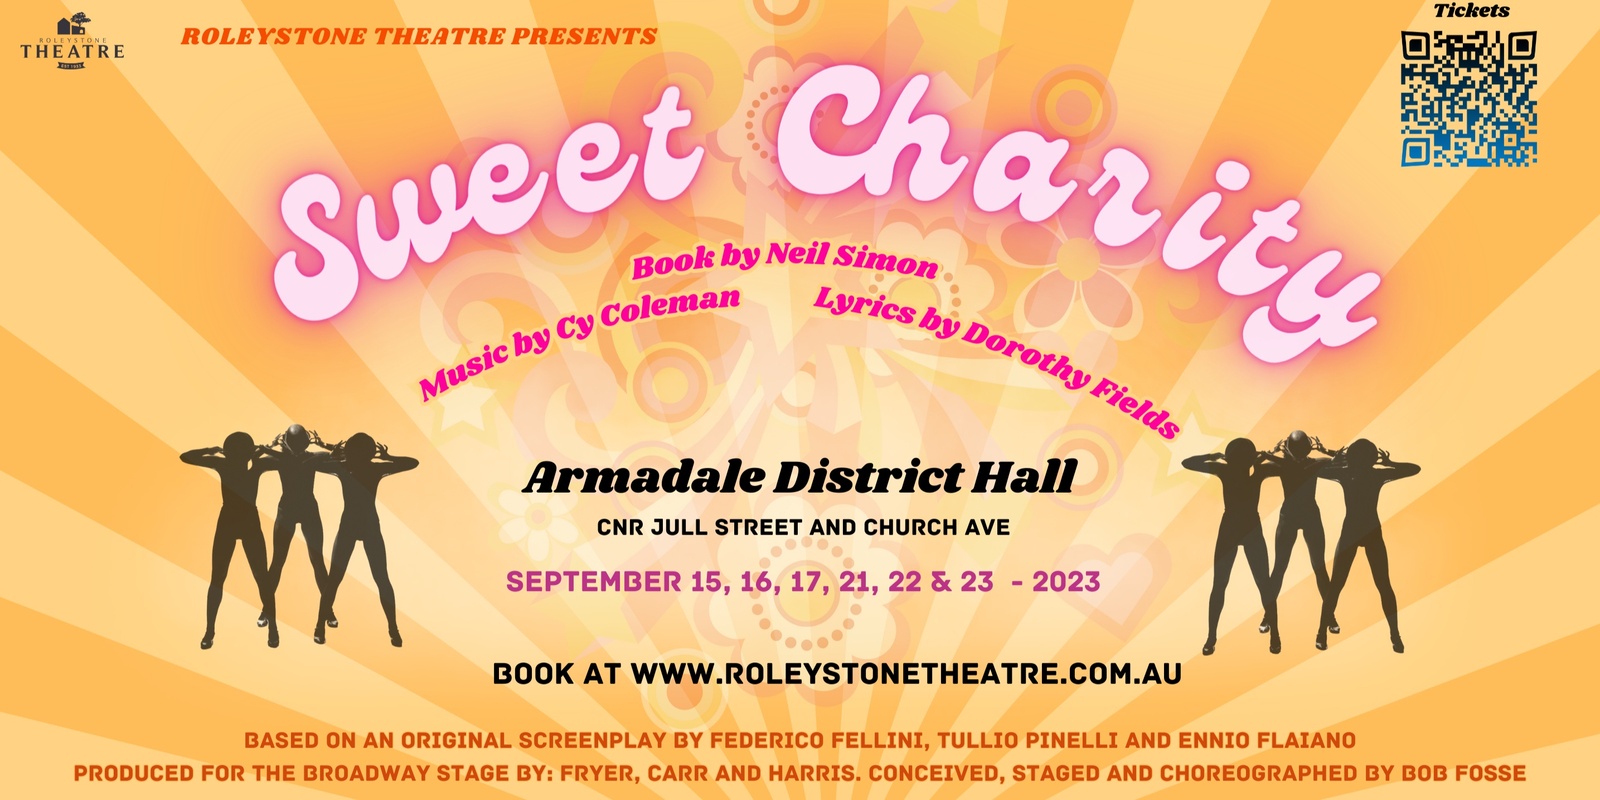 Banner image for Roleystone Theatre Presents: Sweet Charity